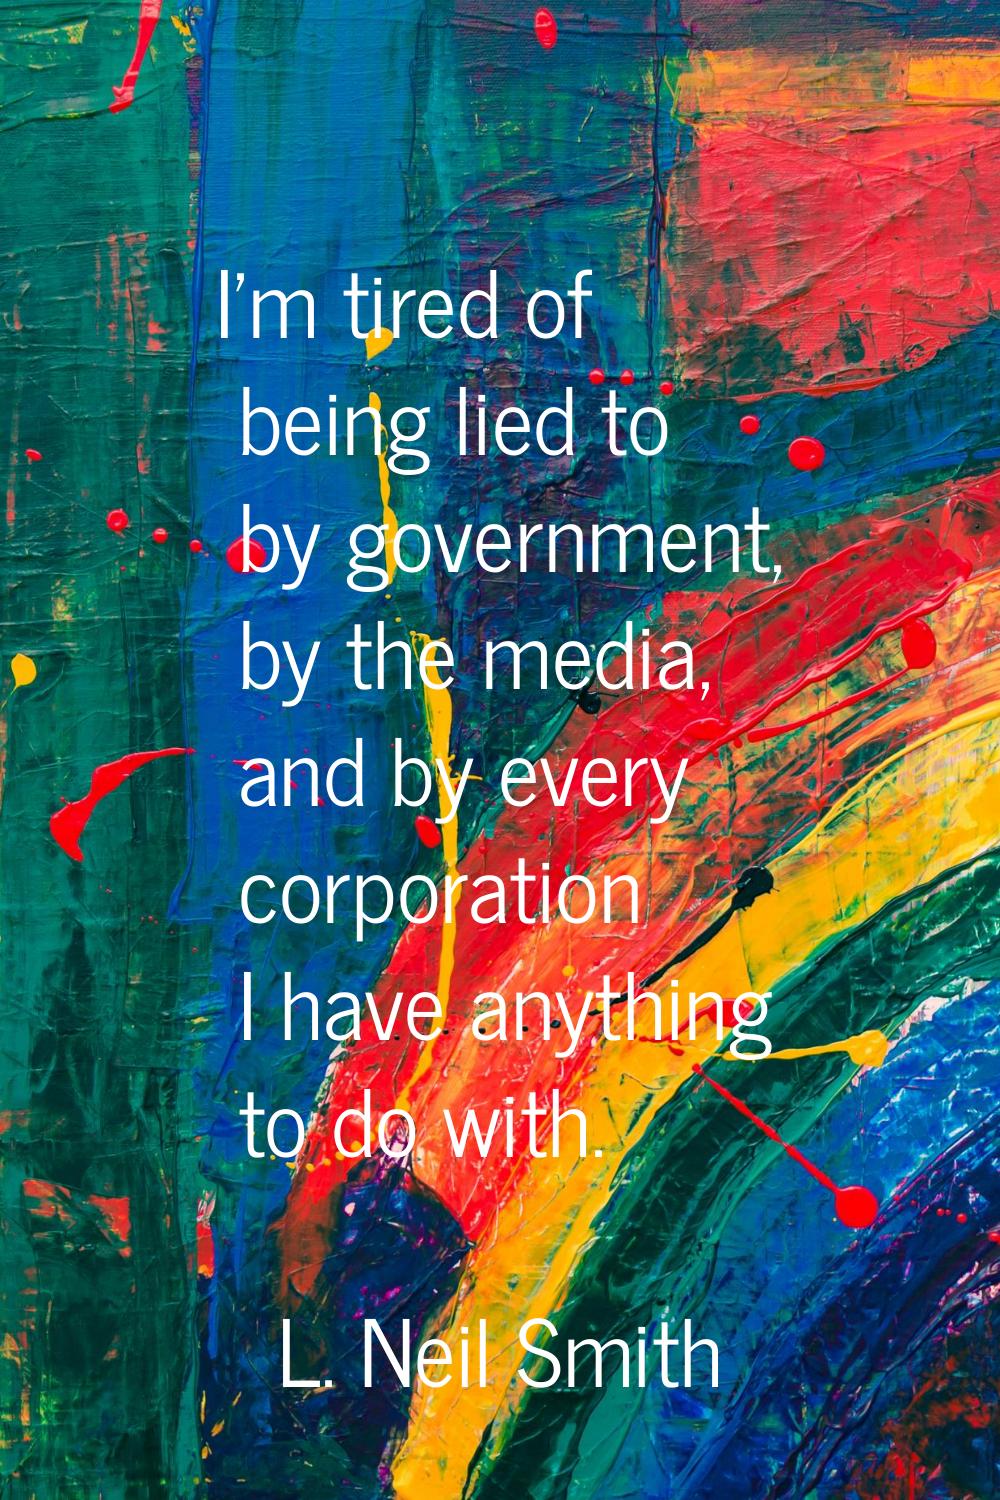 I'm tired of being lied to by government, by the media, and by every corporation I have anything to